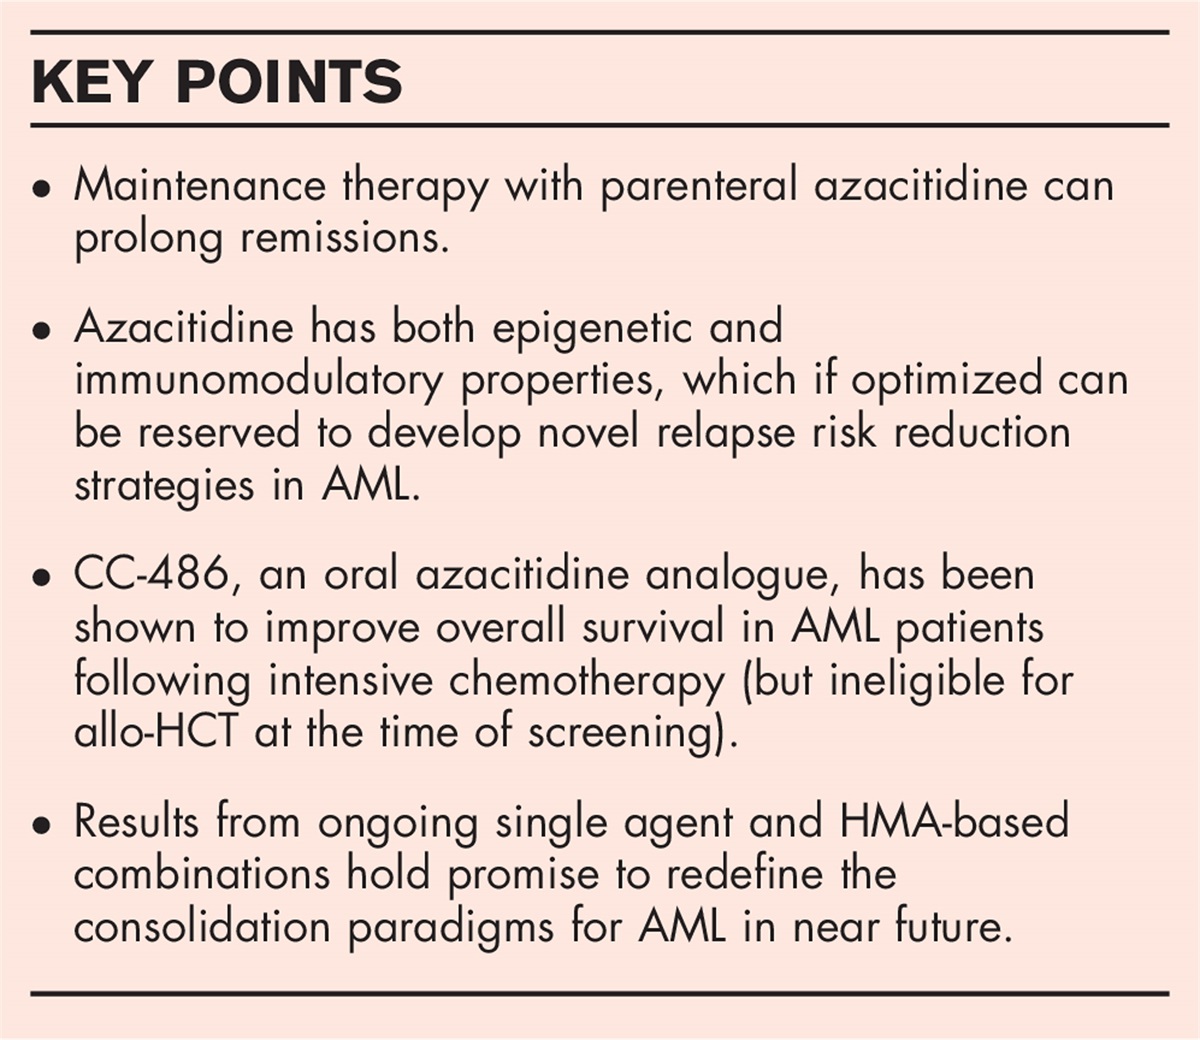 Azacitidine maintenance in AML post induction and posttransplant